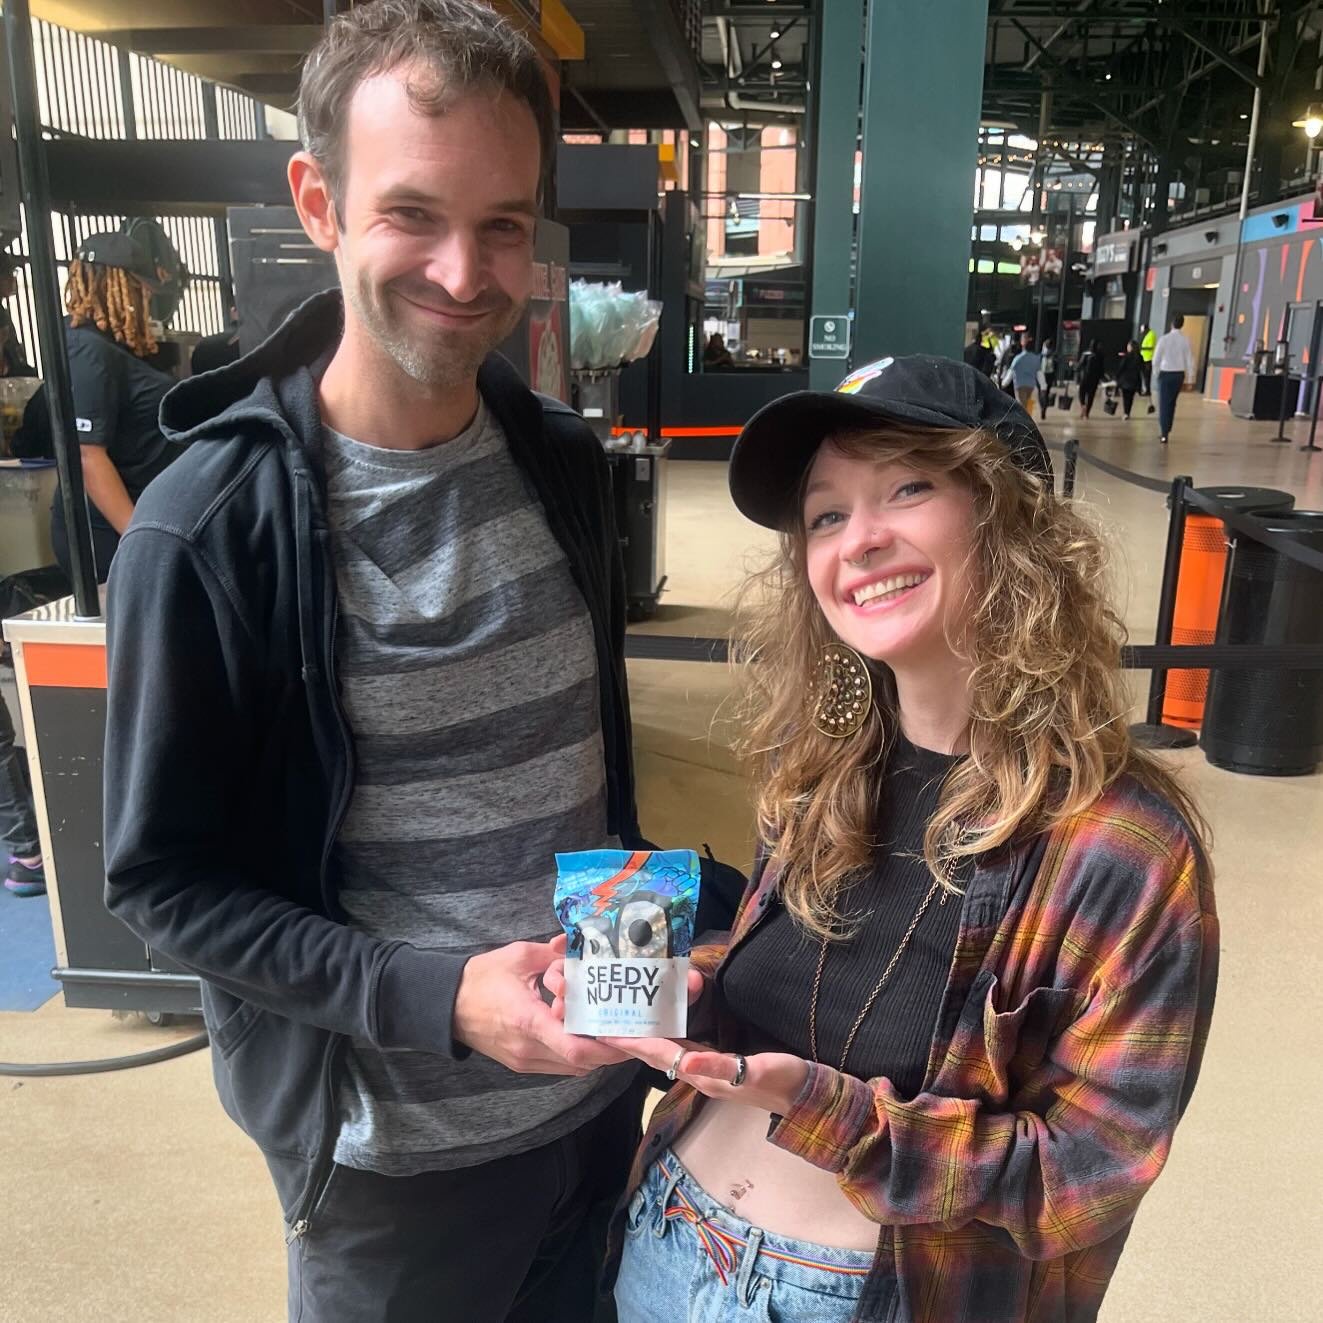 Find SeedyNutty at Oriole Park at Camden Yards section 56! SeedyNutty also helps to teach food production and marketing to the youth of SW Baltimore at The Food Project

#socialenterprise #delicious #vegansnack #goodforyou #goodforbaltimore #employme